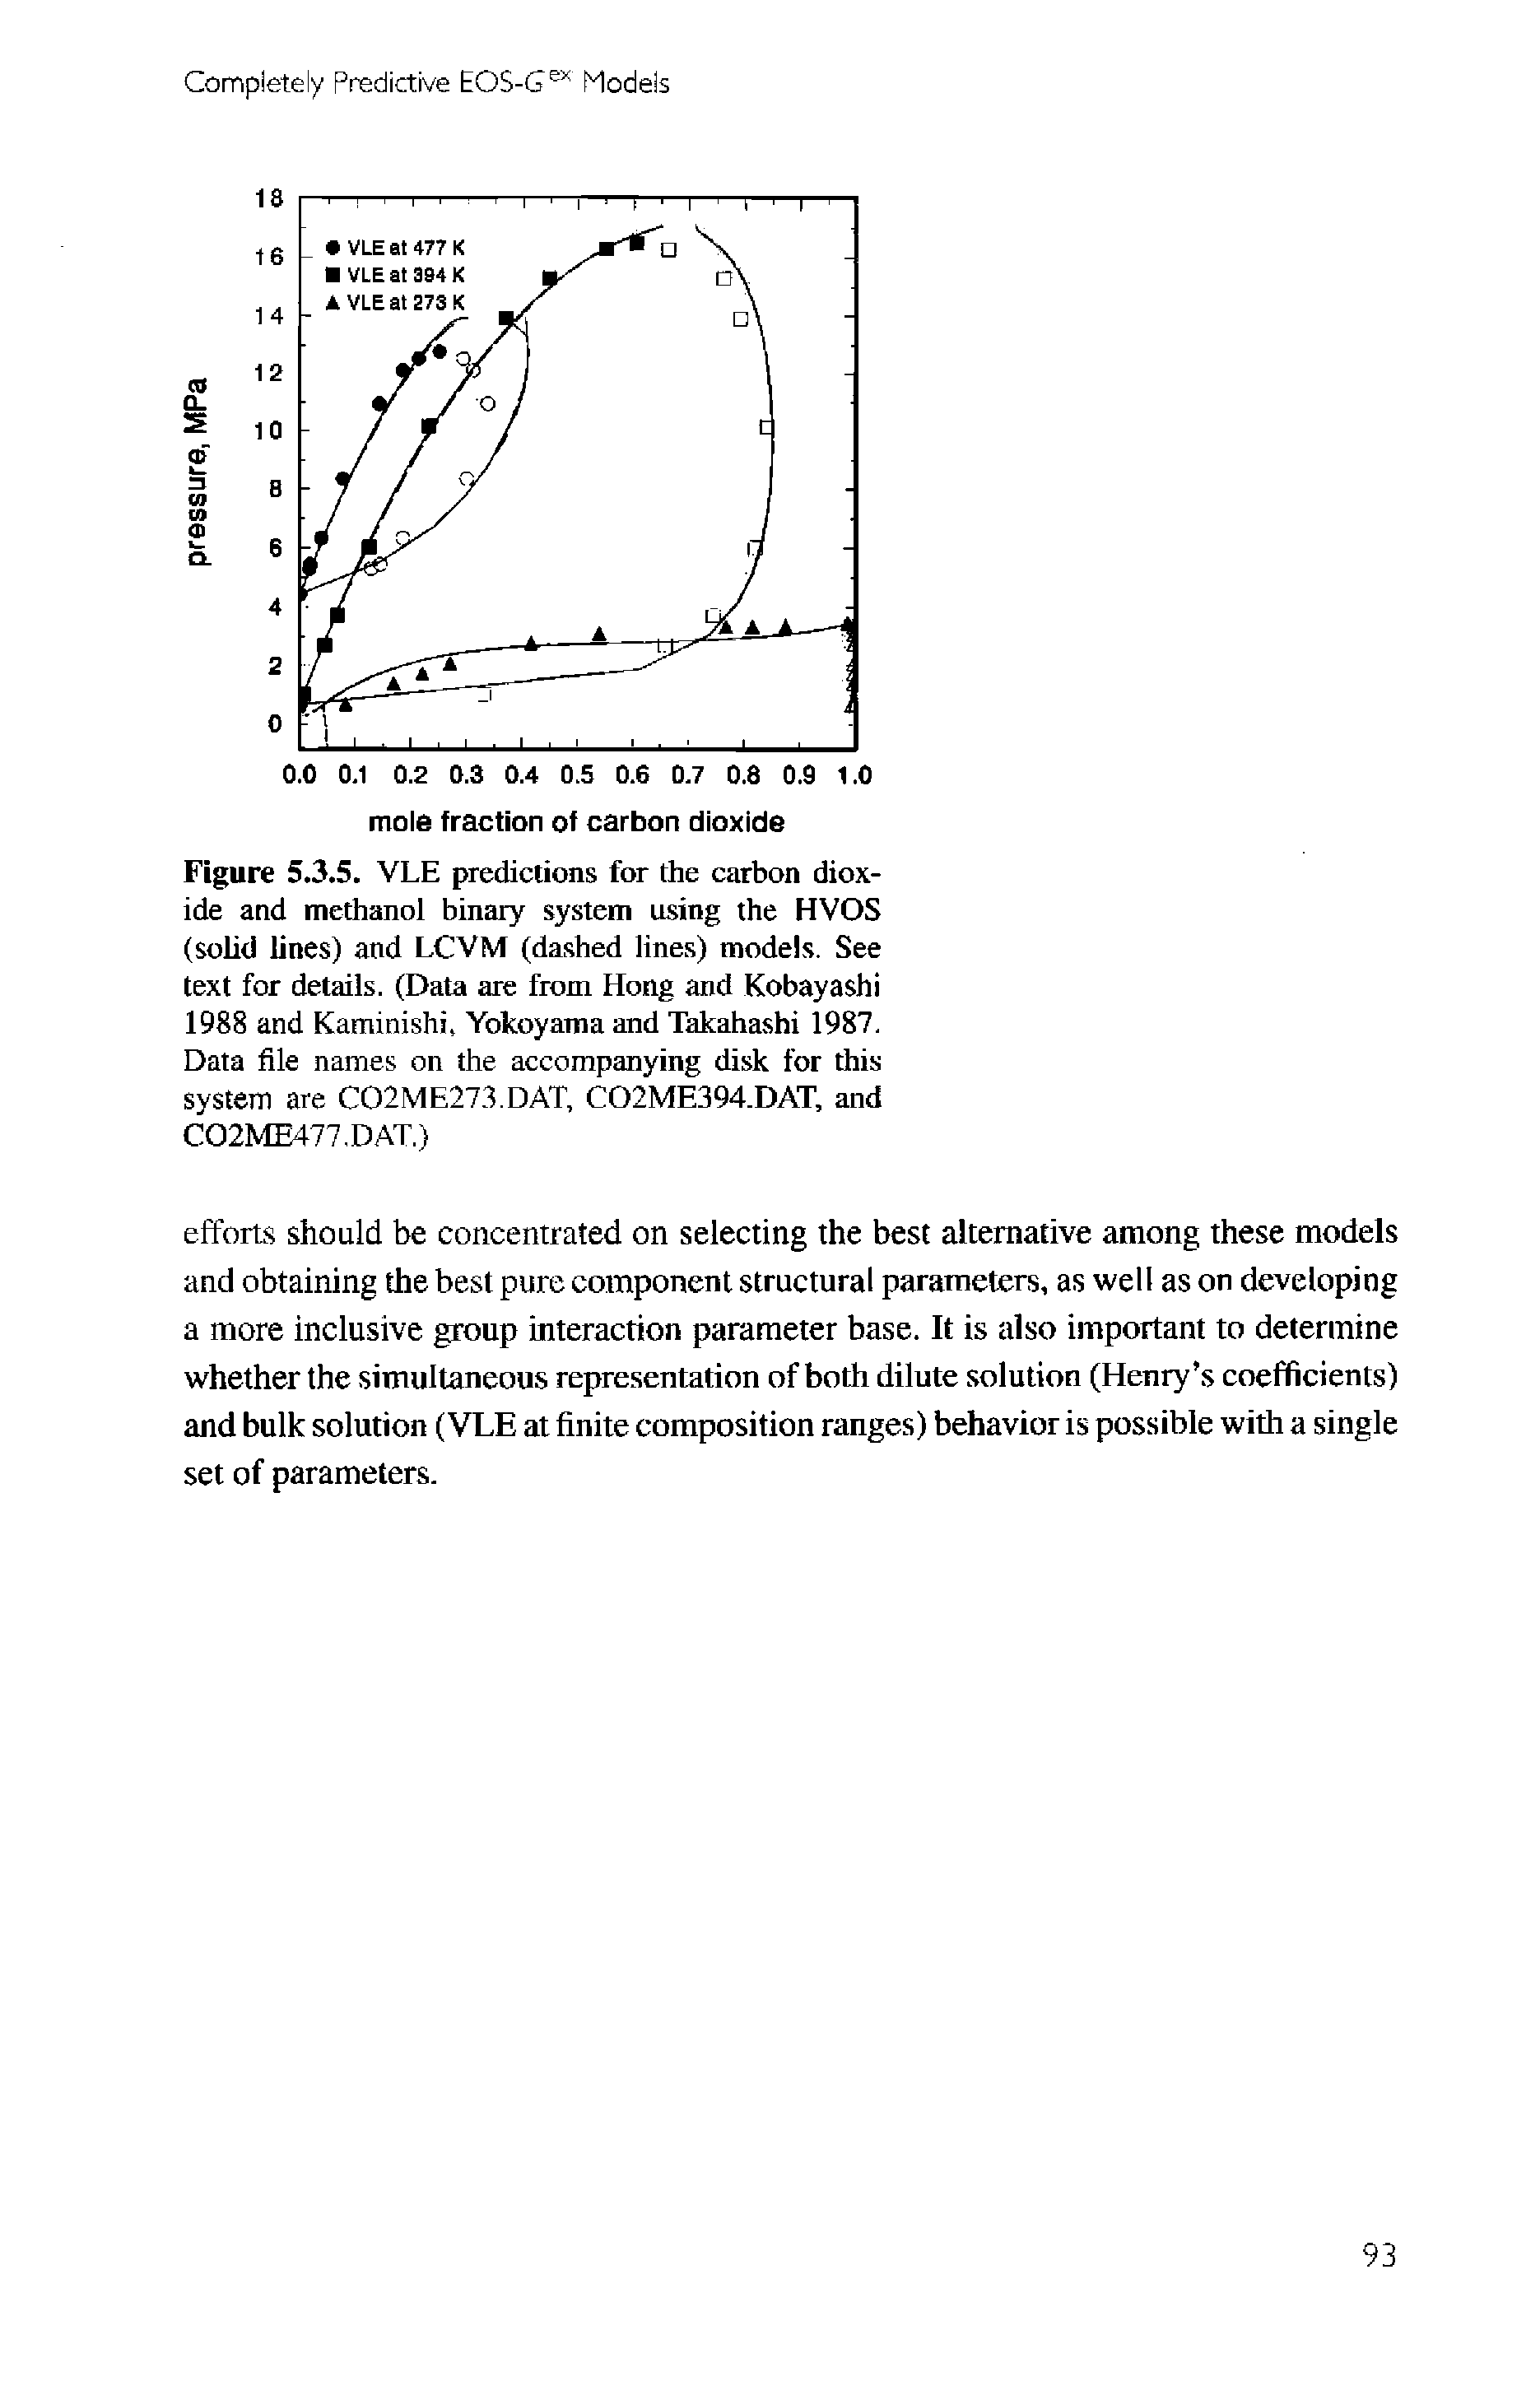 Figure 5.3.5. VLE predictions for the carbon dioxide and methanol binary system using the HVOS (solid lines) and LCVM (dashed lines) models. See text for details. (Data are from Hong and Kobayashi 1988 and Kaminishi, Yokoyama and Takahashi 1987. Data file names on the accompanying disk for this system are C02ME273.DAT, C02ME394.DAT, and C02ME477.DAT.)...